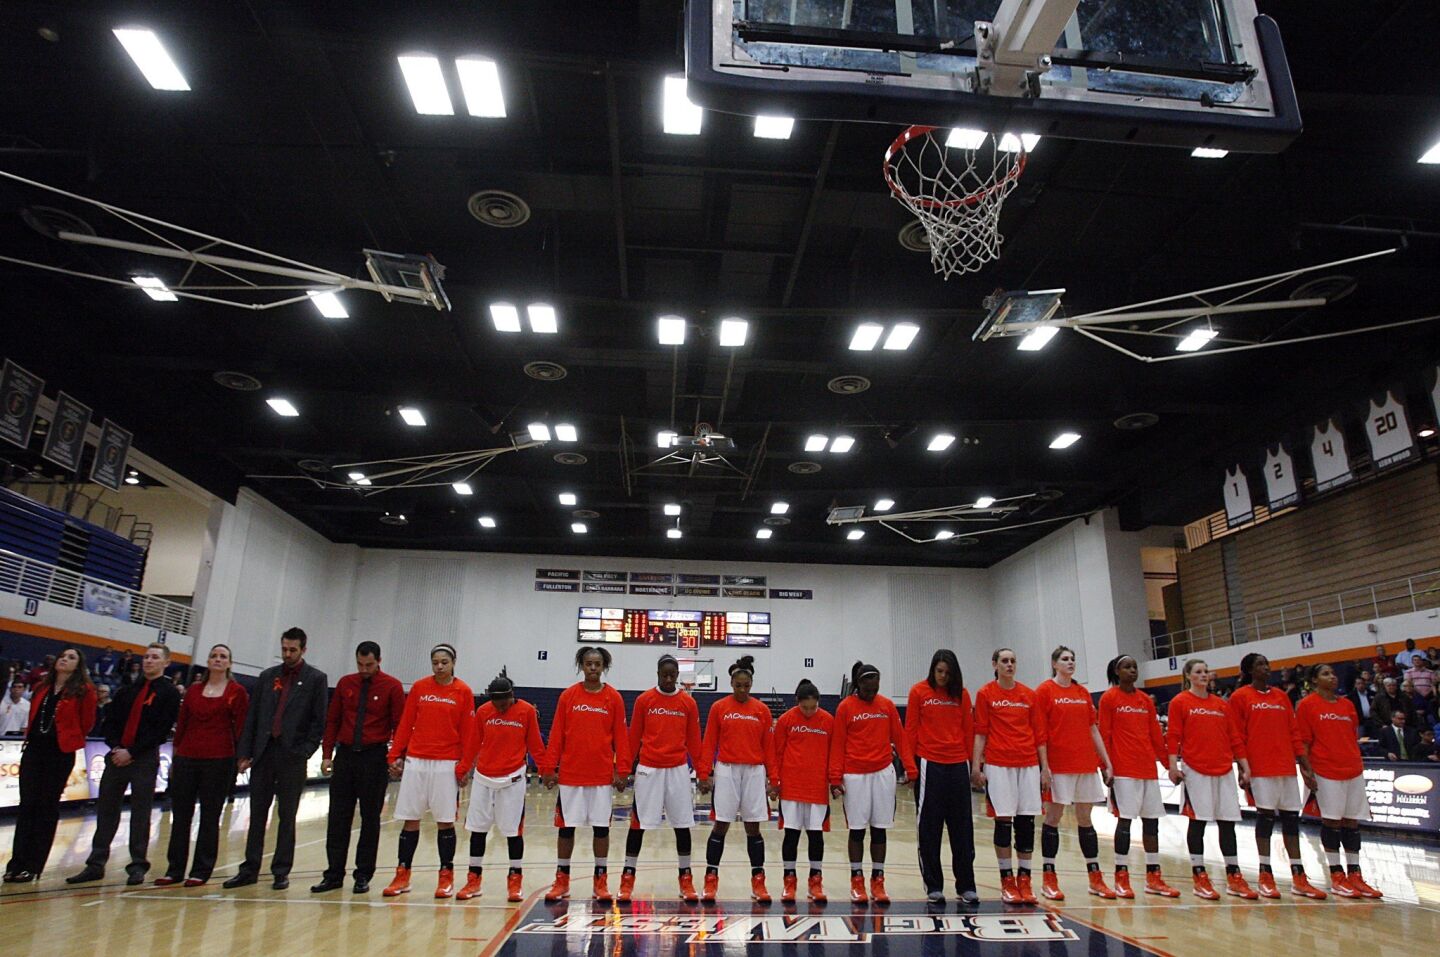 Members of the Cal State Fullerton women's basketball team join hands for a moment of silence to honor slain assistant coach Monica Quan before a home game against UC Irvine.